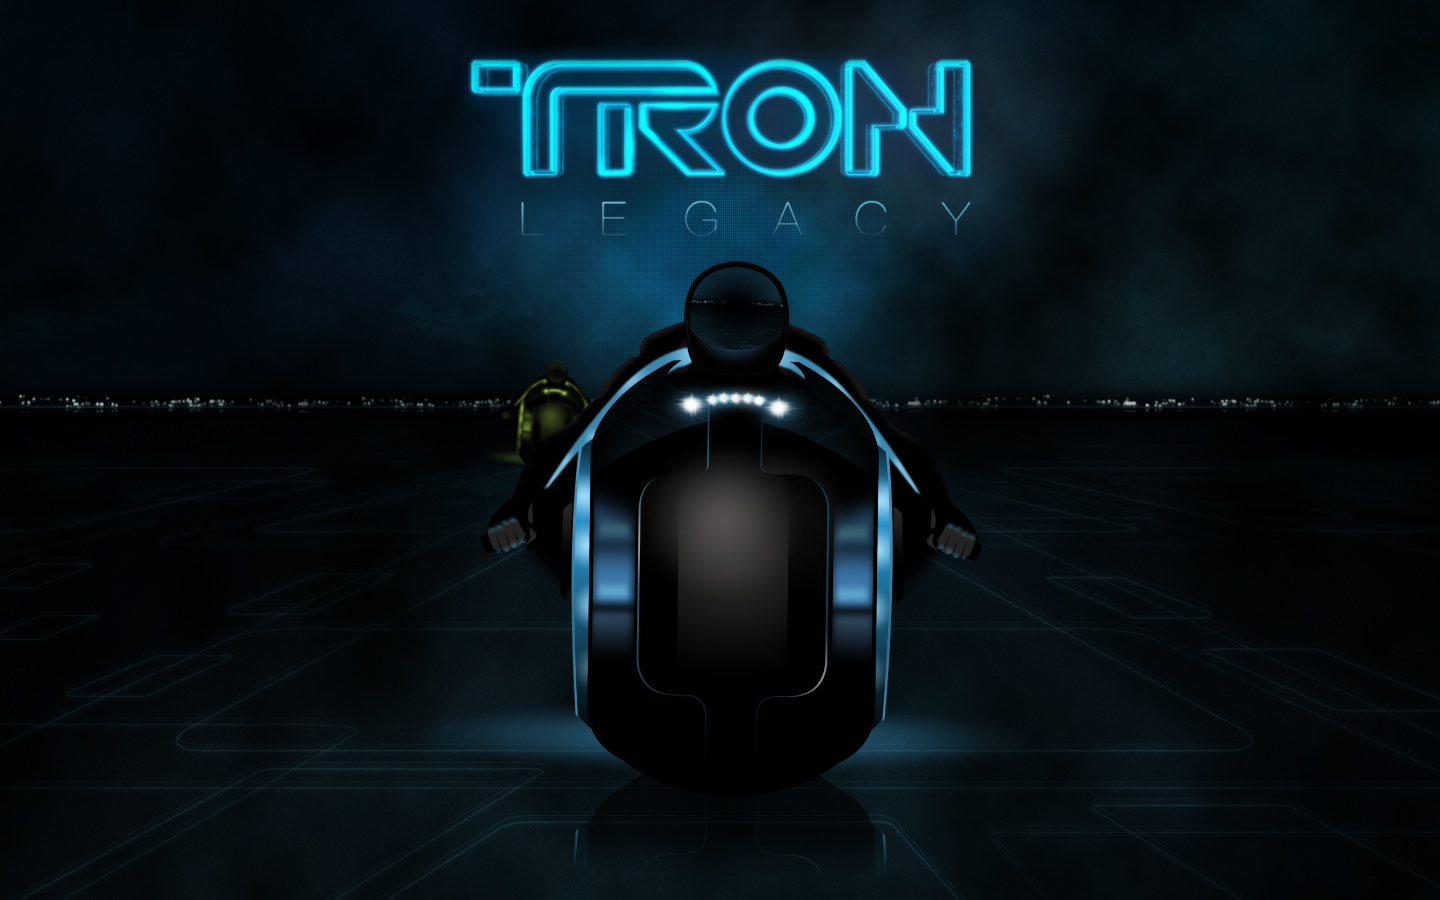 Tron Legacy is the latest